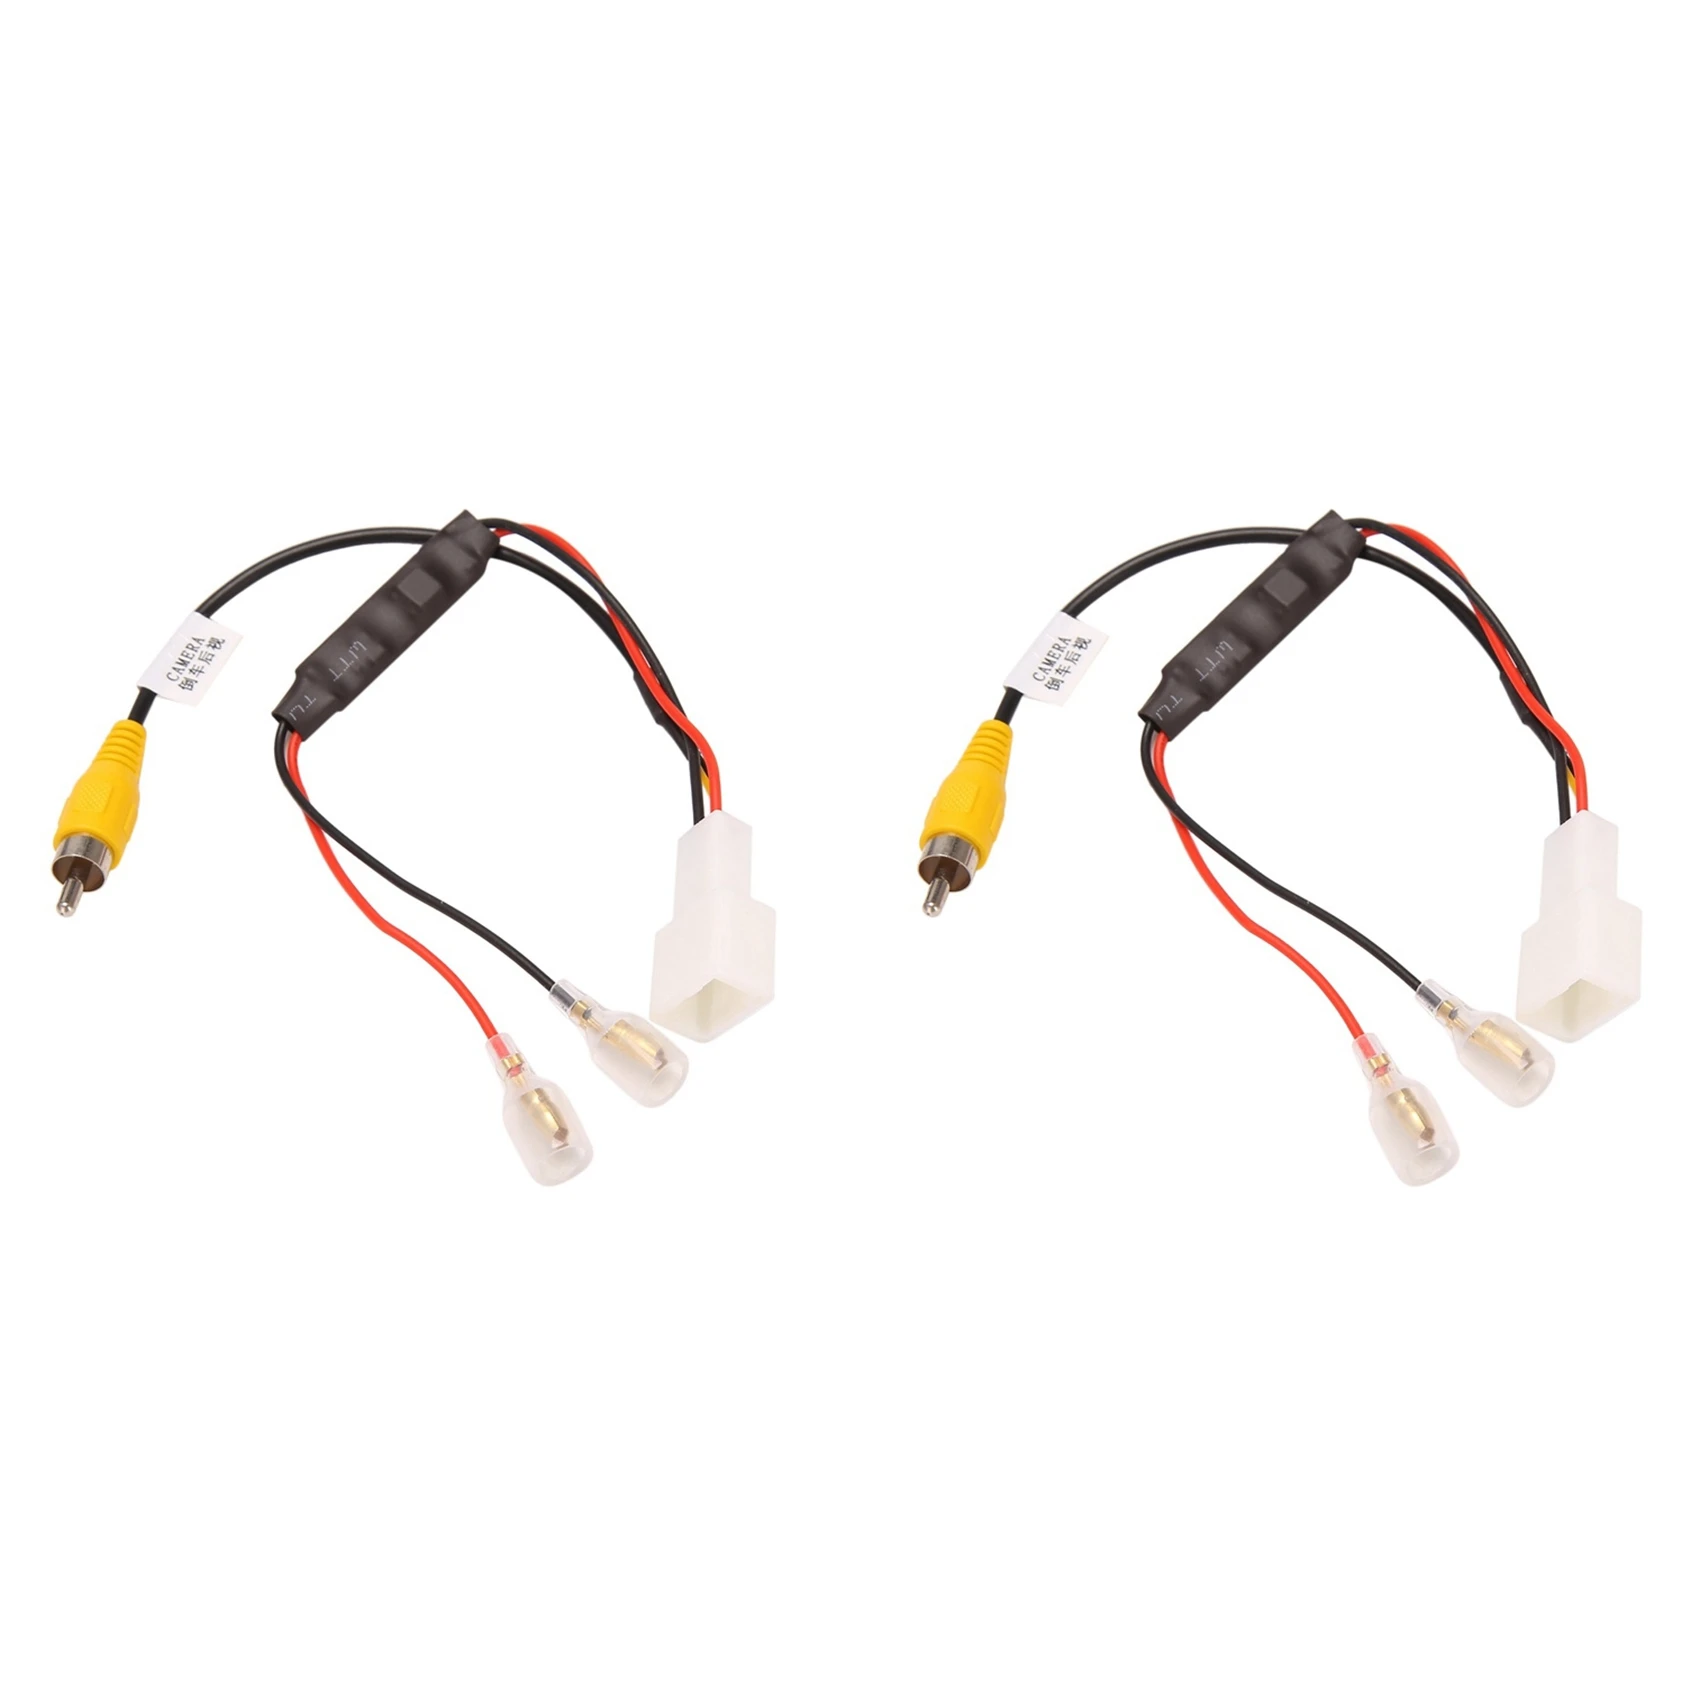 

2Pcs 4 Pin Car Reversing Camera Retention Wiring Harness Cable Plug Reverse Connector Cable Adapter Fit for Toyota